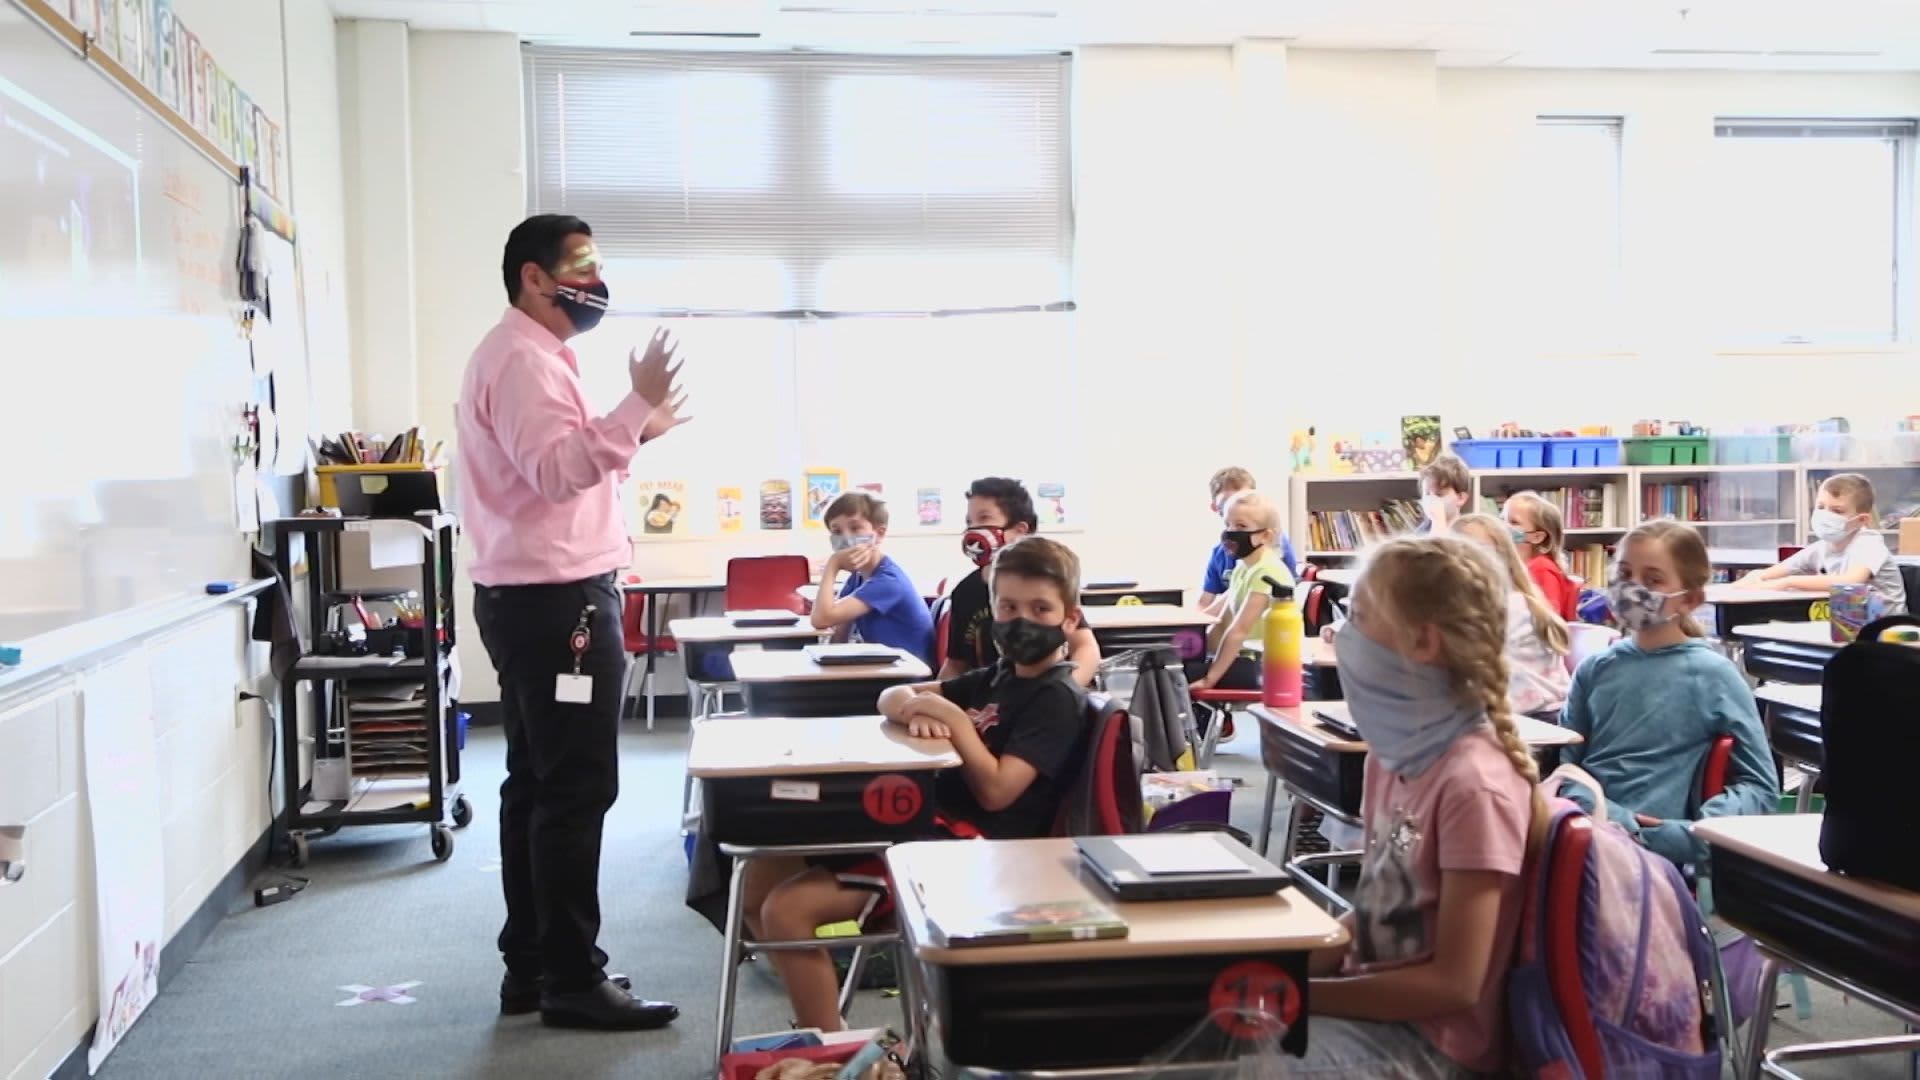 Lee Jimenez, a teacher at Indian Hill Elementary School in Cincinnati, Ohio, discusses credit cards and methods of payments with his 3rd grade class using online financial education curriculum SmartPath.